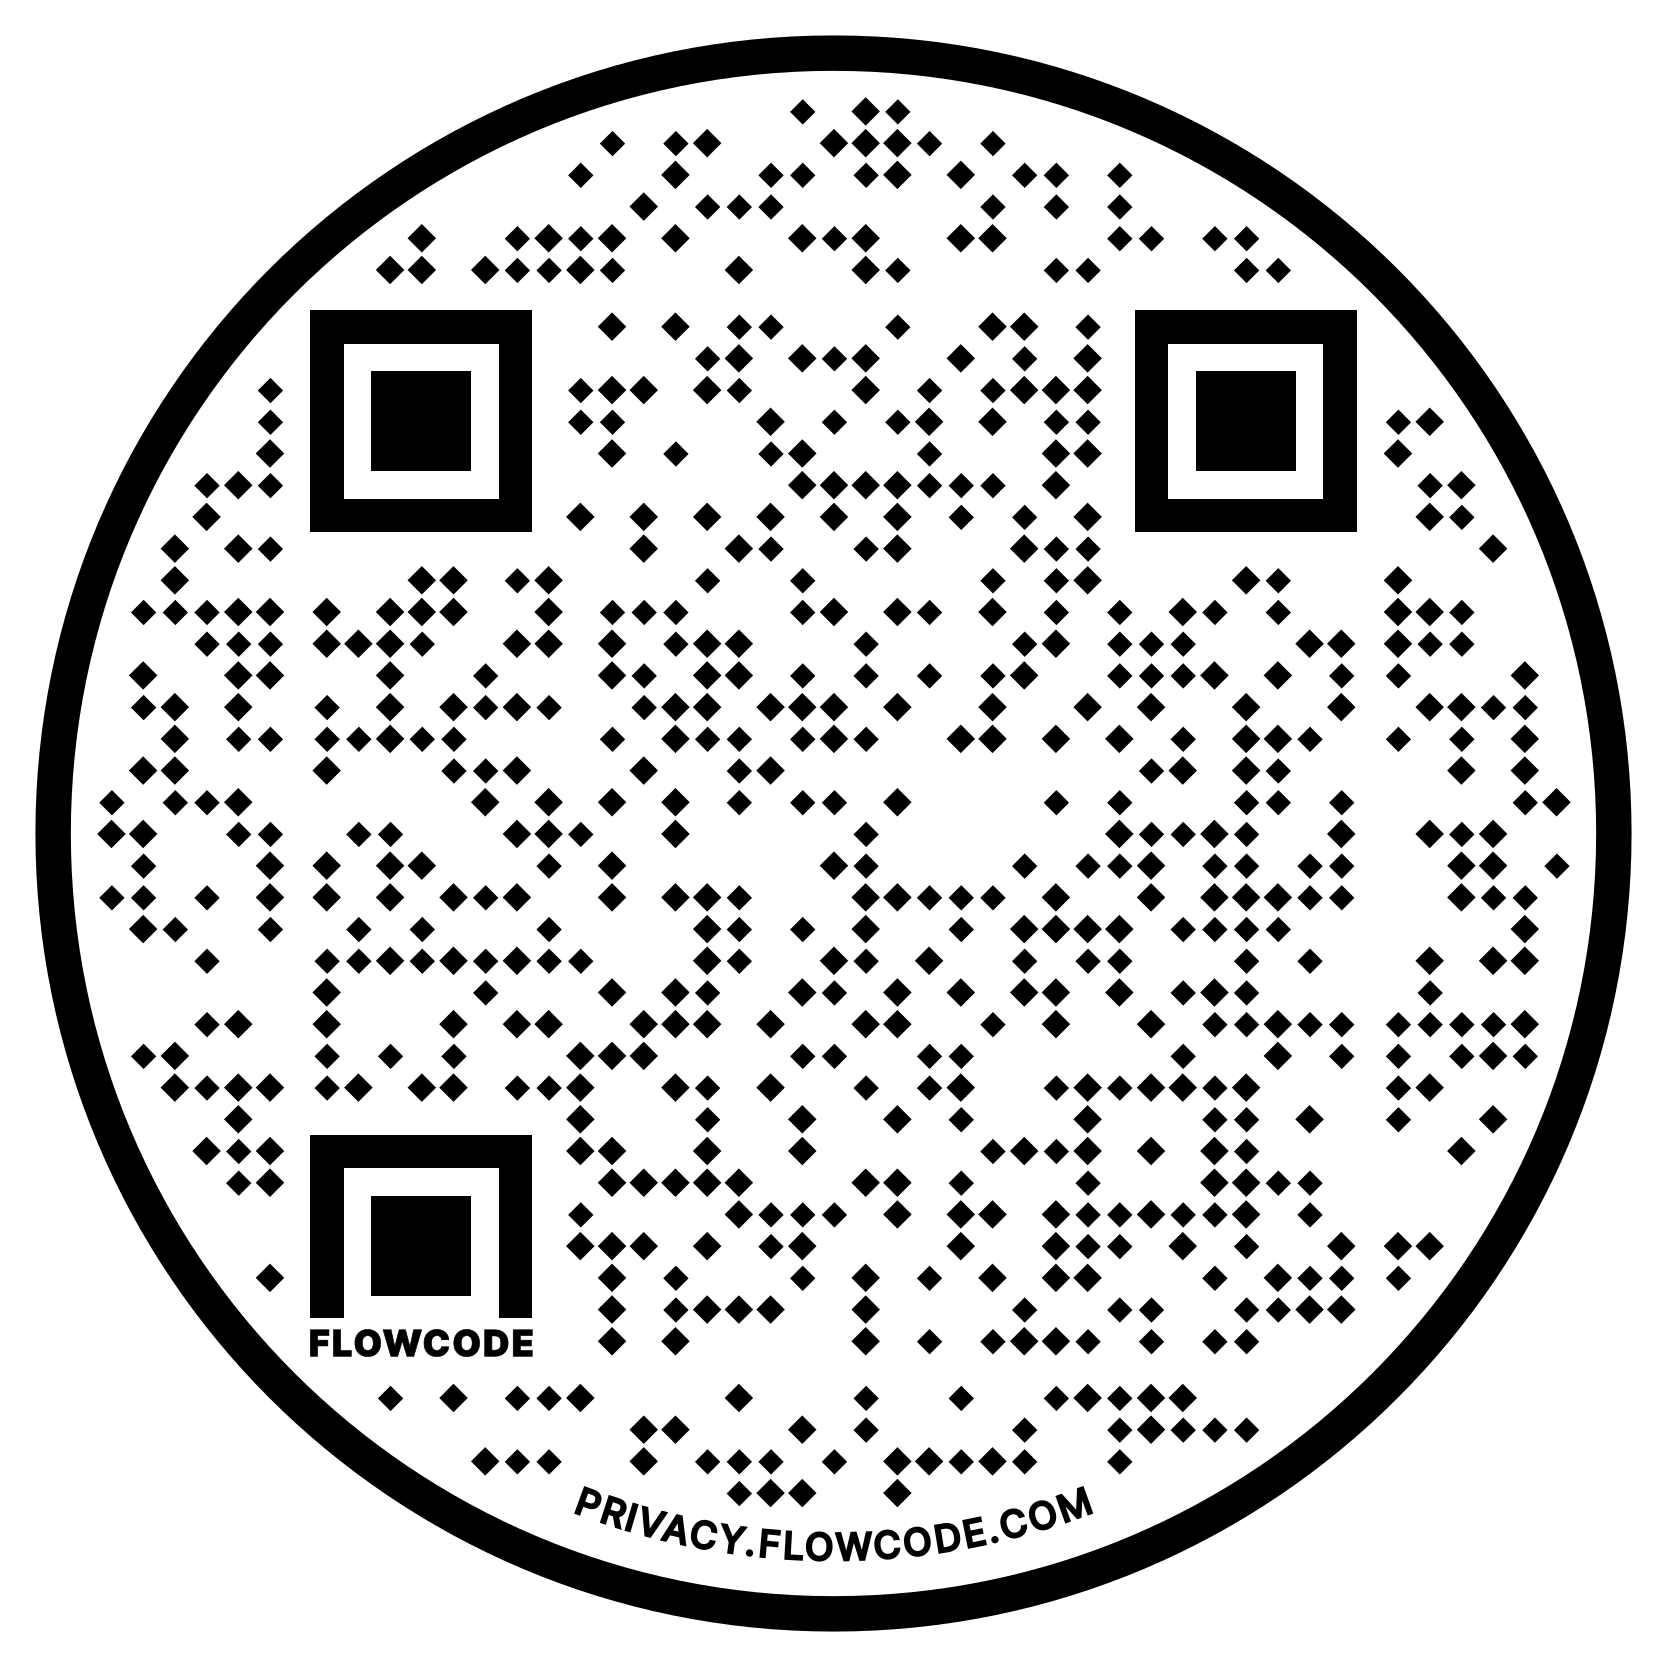 CBC QR Code Giving Link